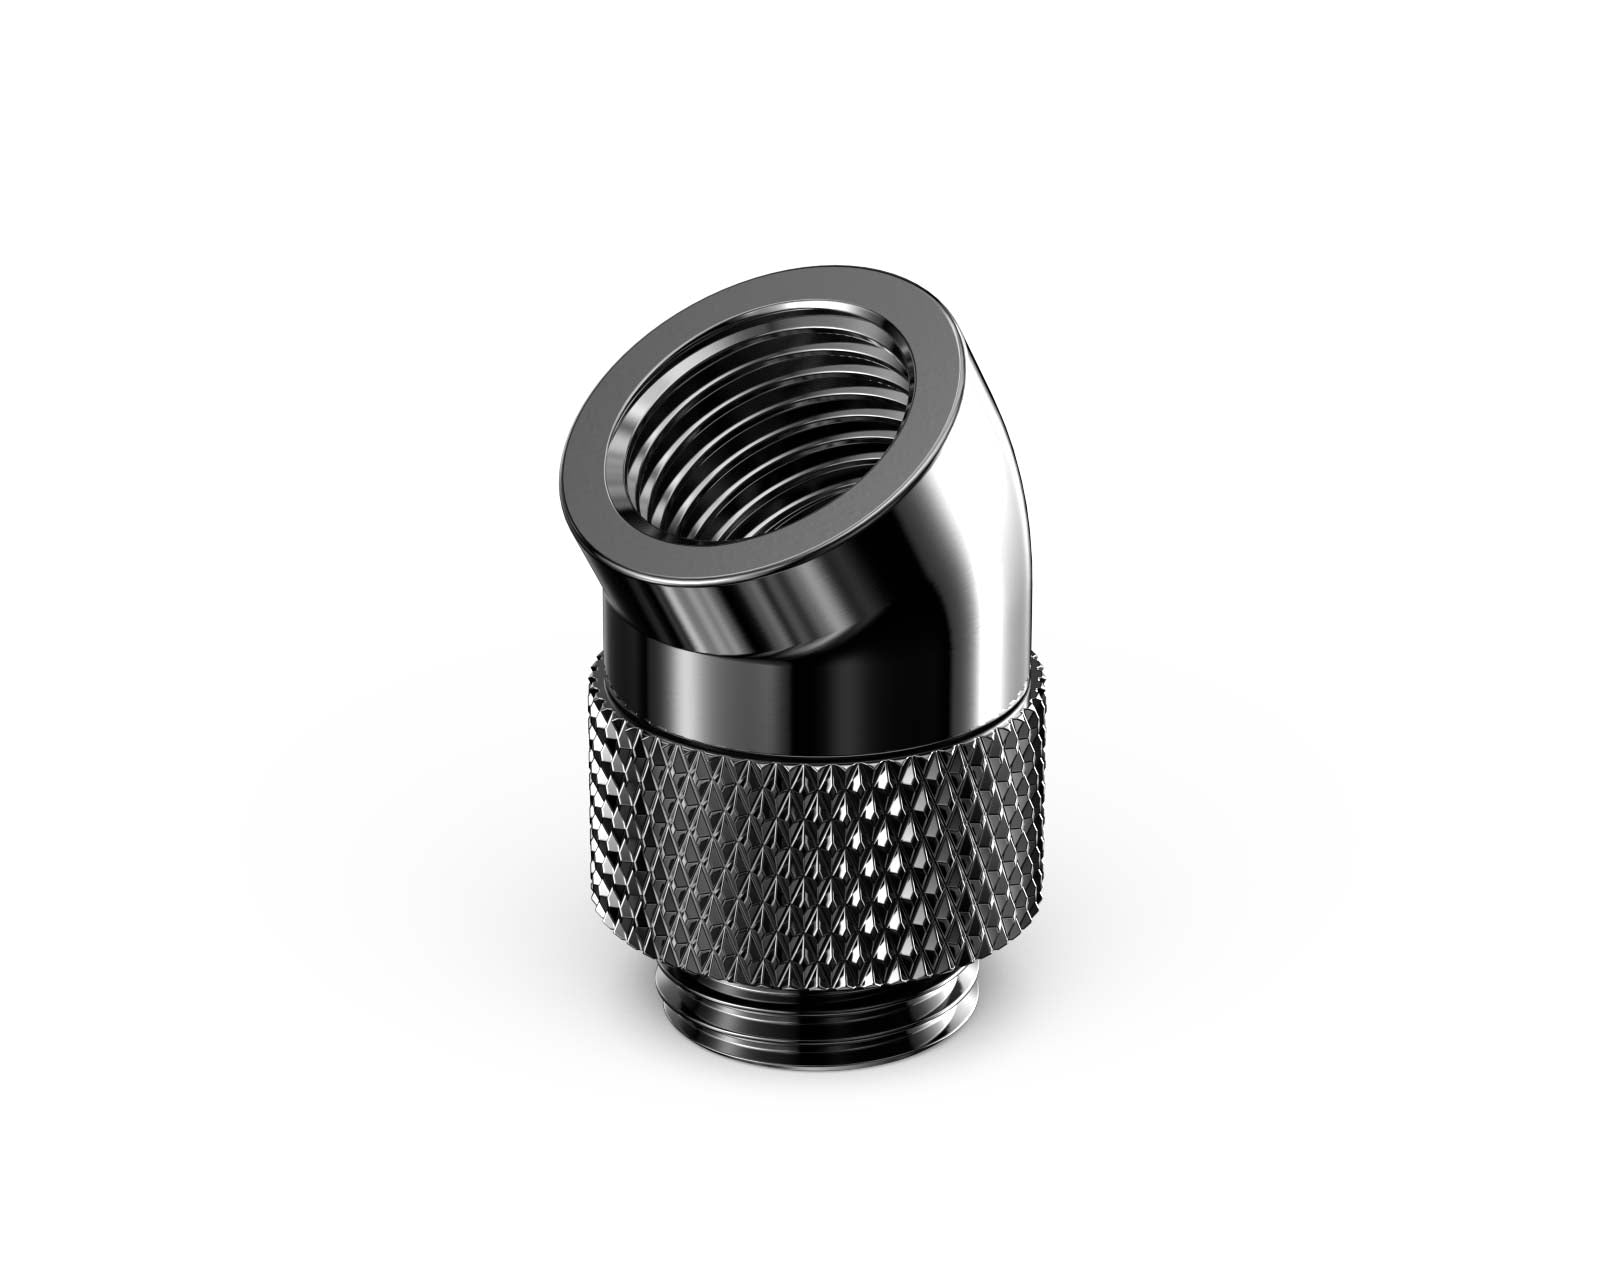 PrimoChill Male to Female G 1/4in. 30 Degree SX Rotary Elbow Fitting - PrimoChill - KEEPING IT COOL Dark Nickel